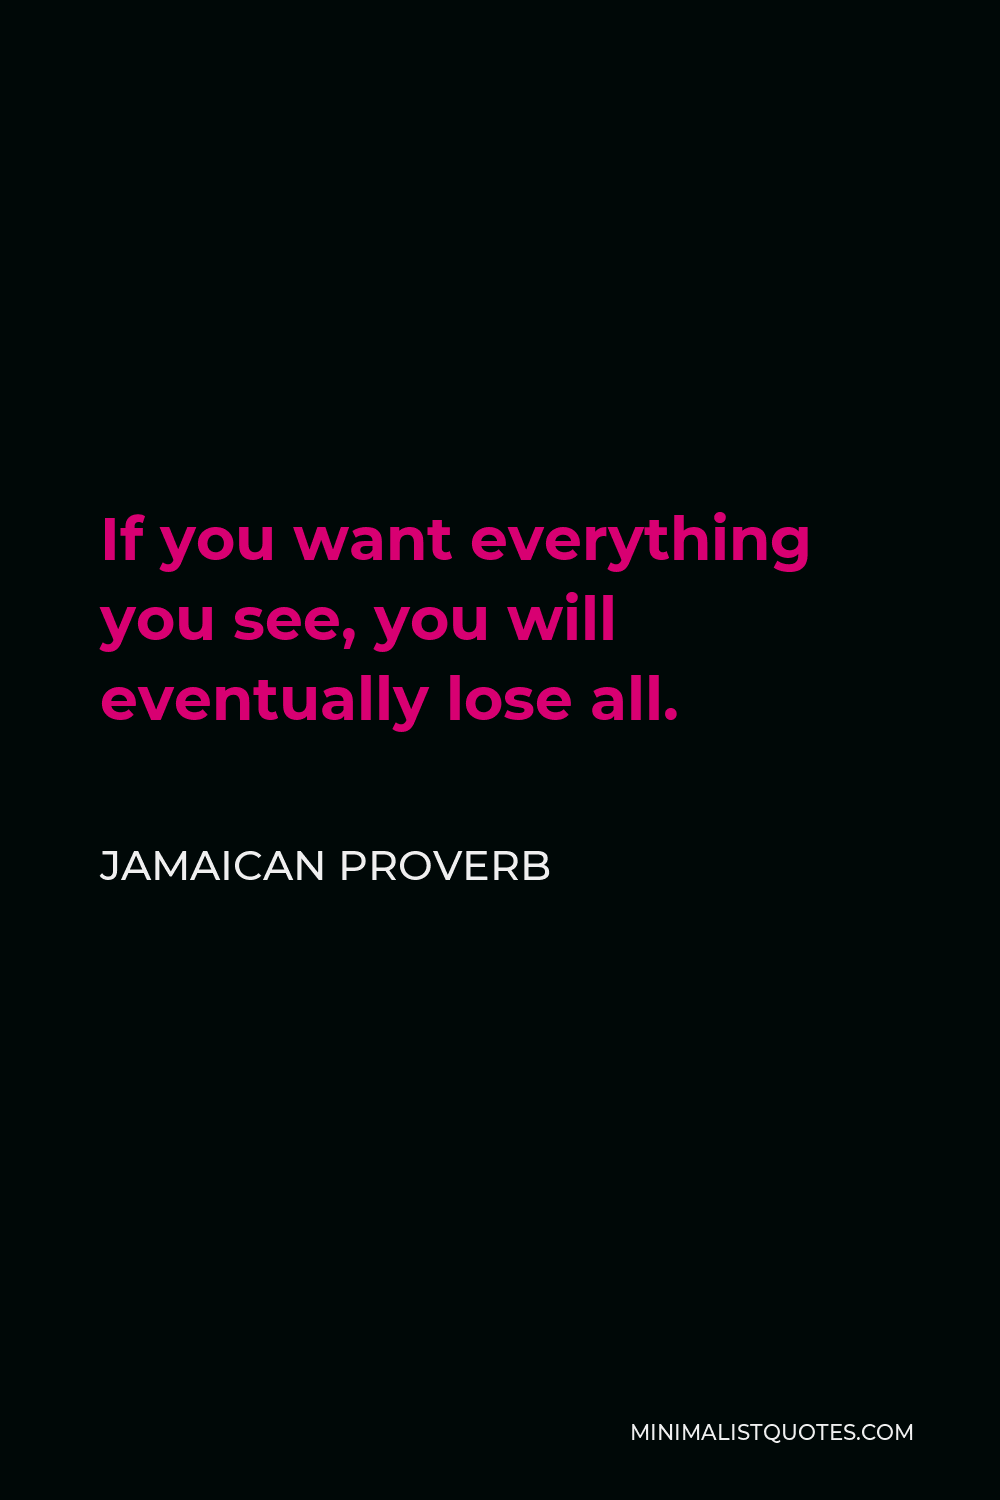 Jamaican Proverb Quote - If you want everything you see, you will eventually lose all.